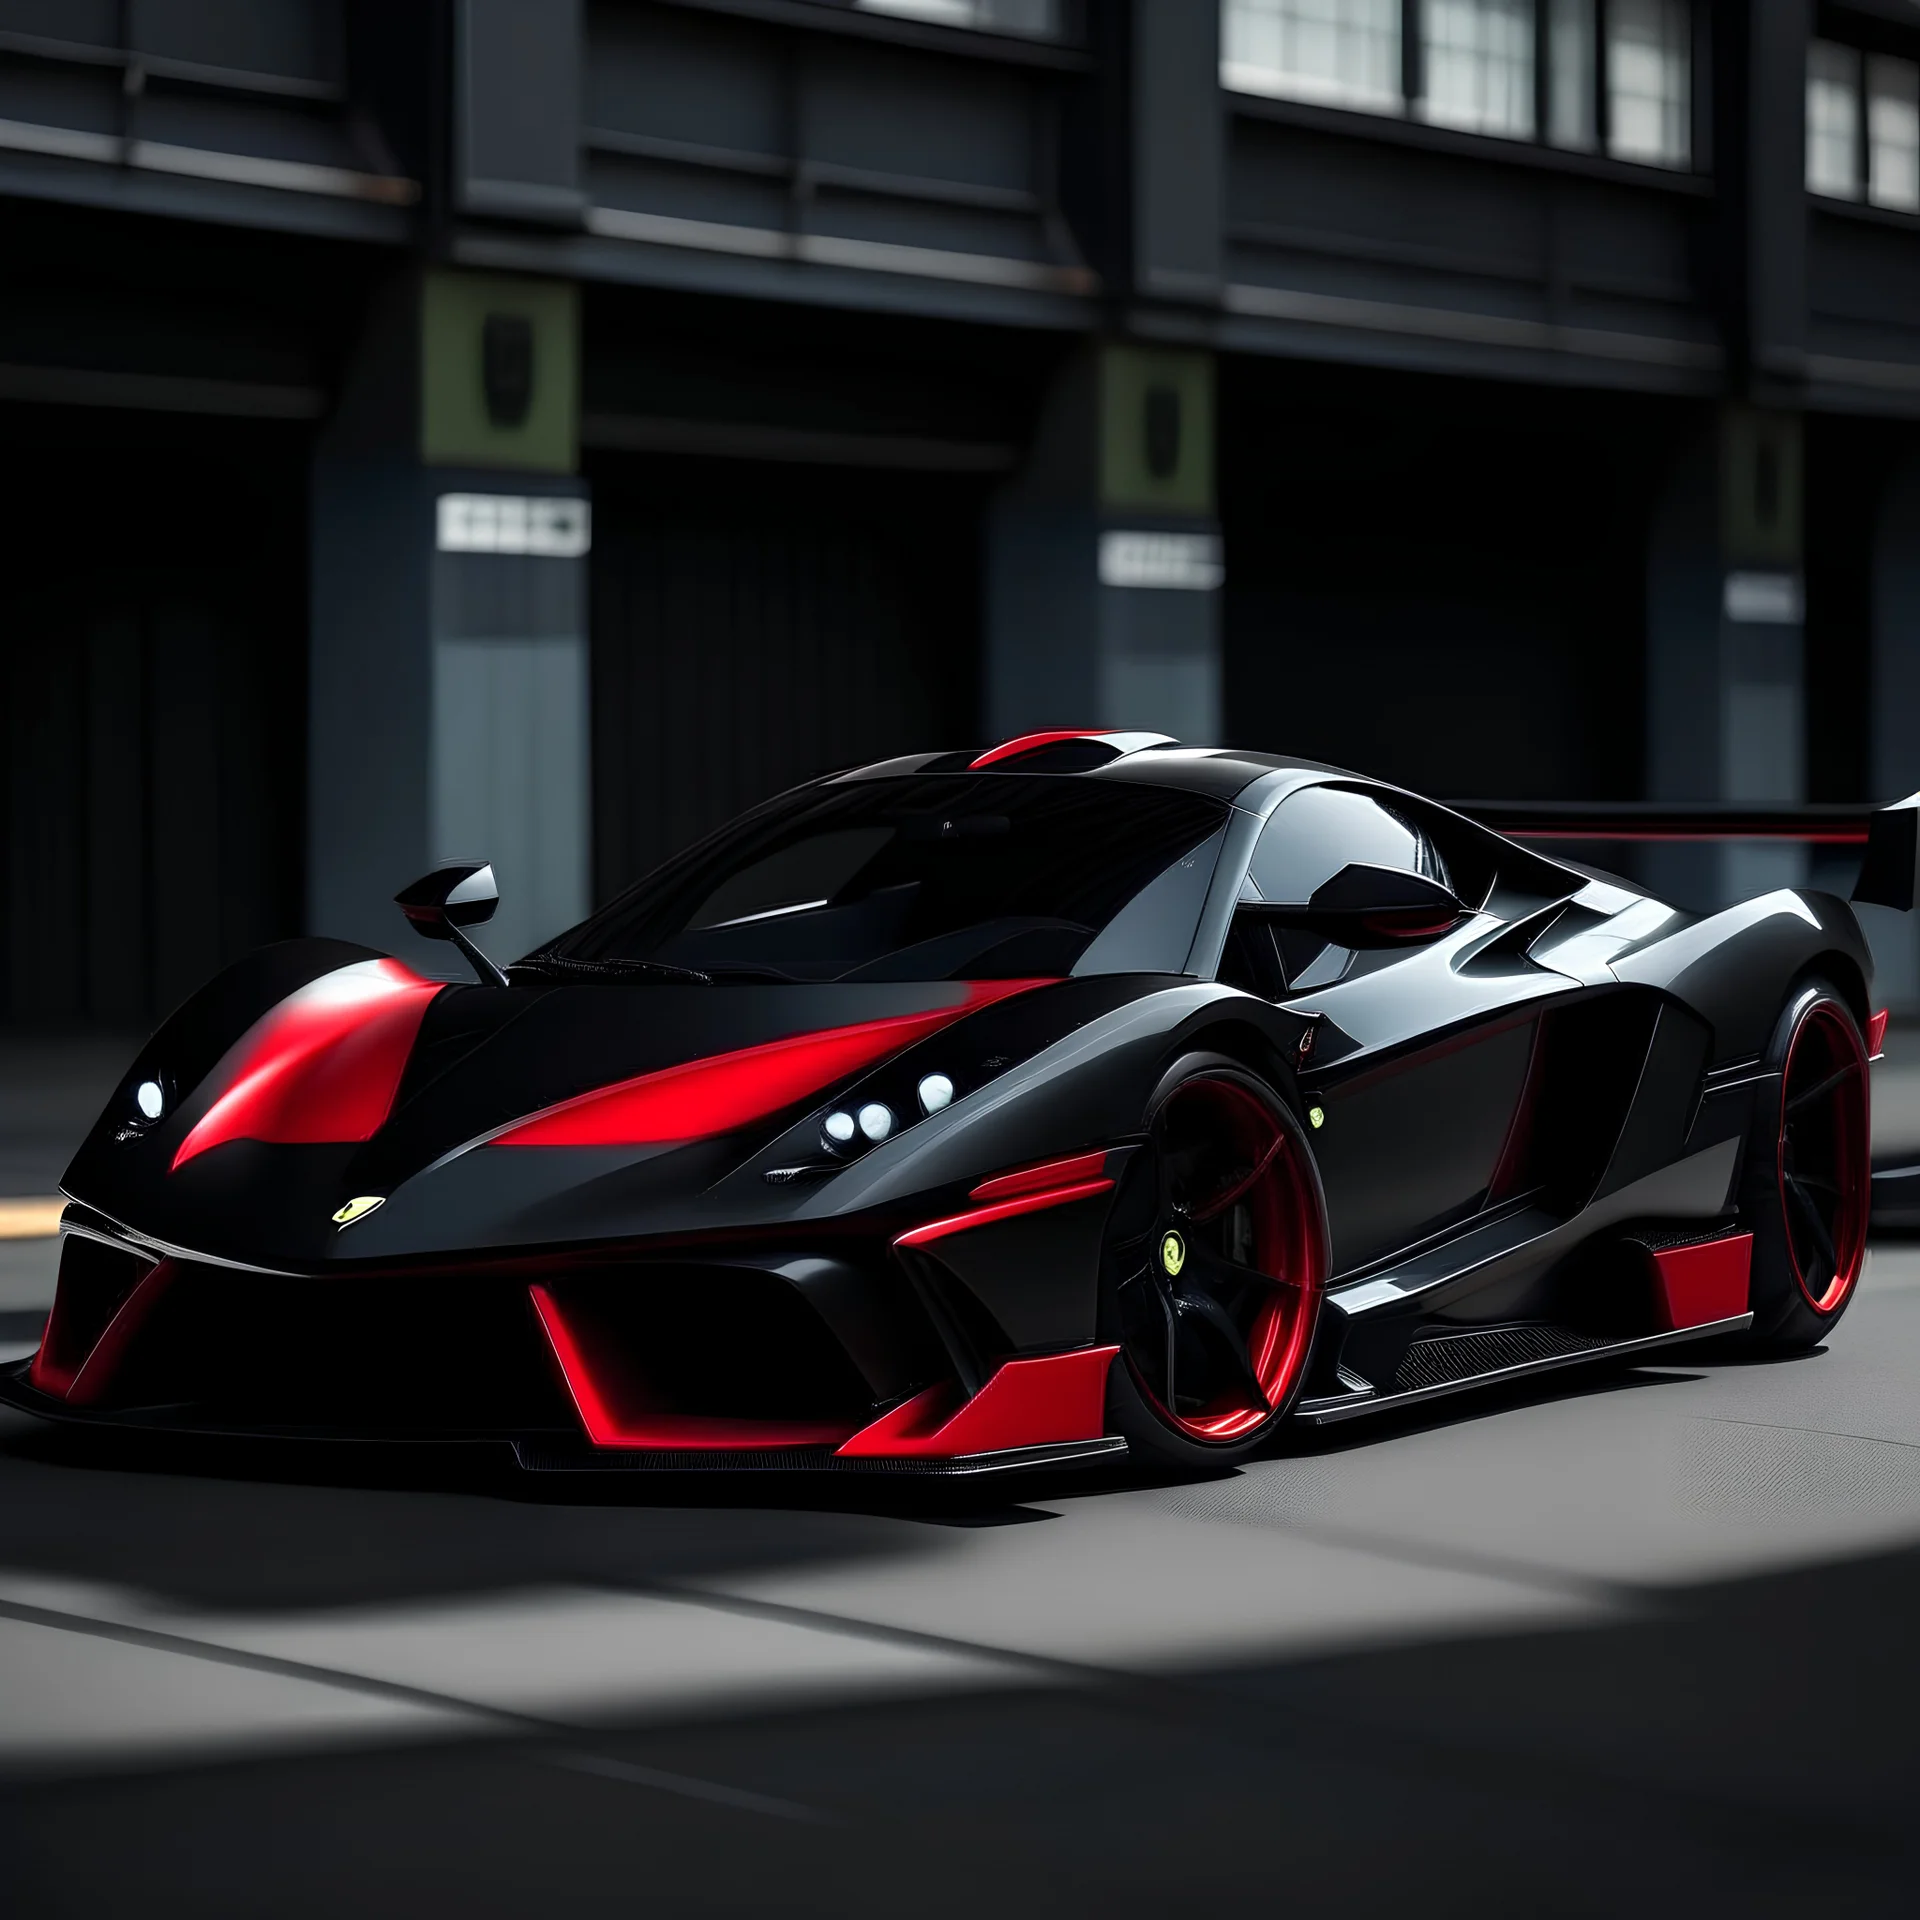 black and neon red very modern car that looks similar to the ferrari fxx-k